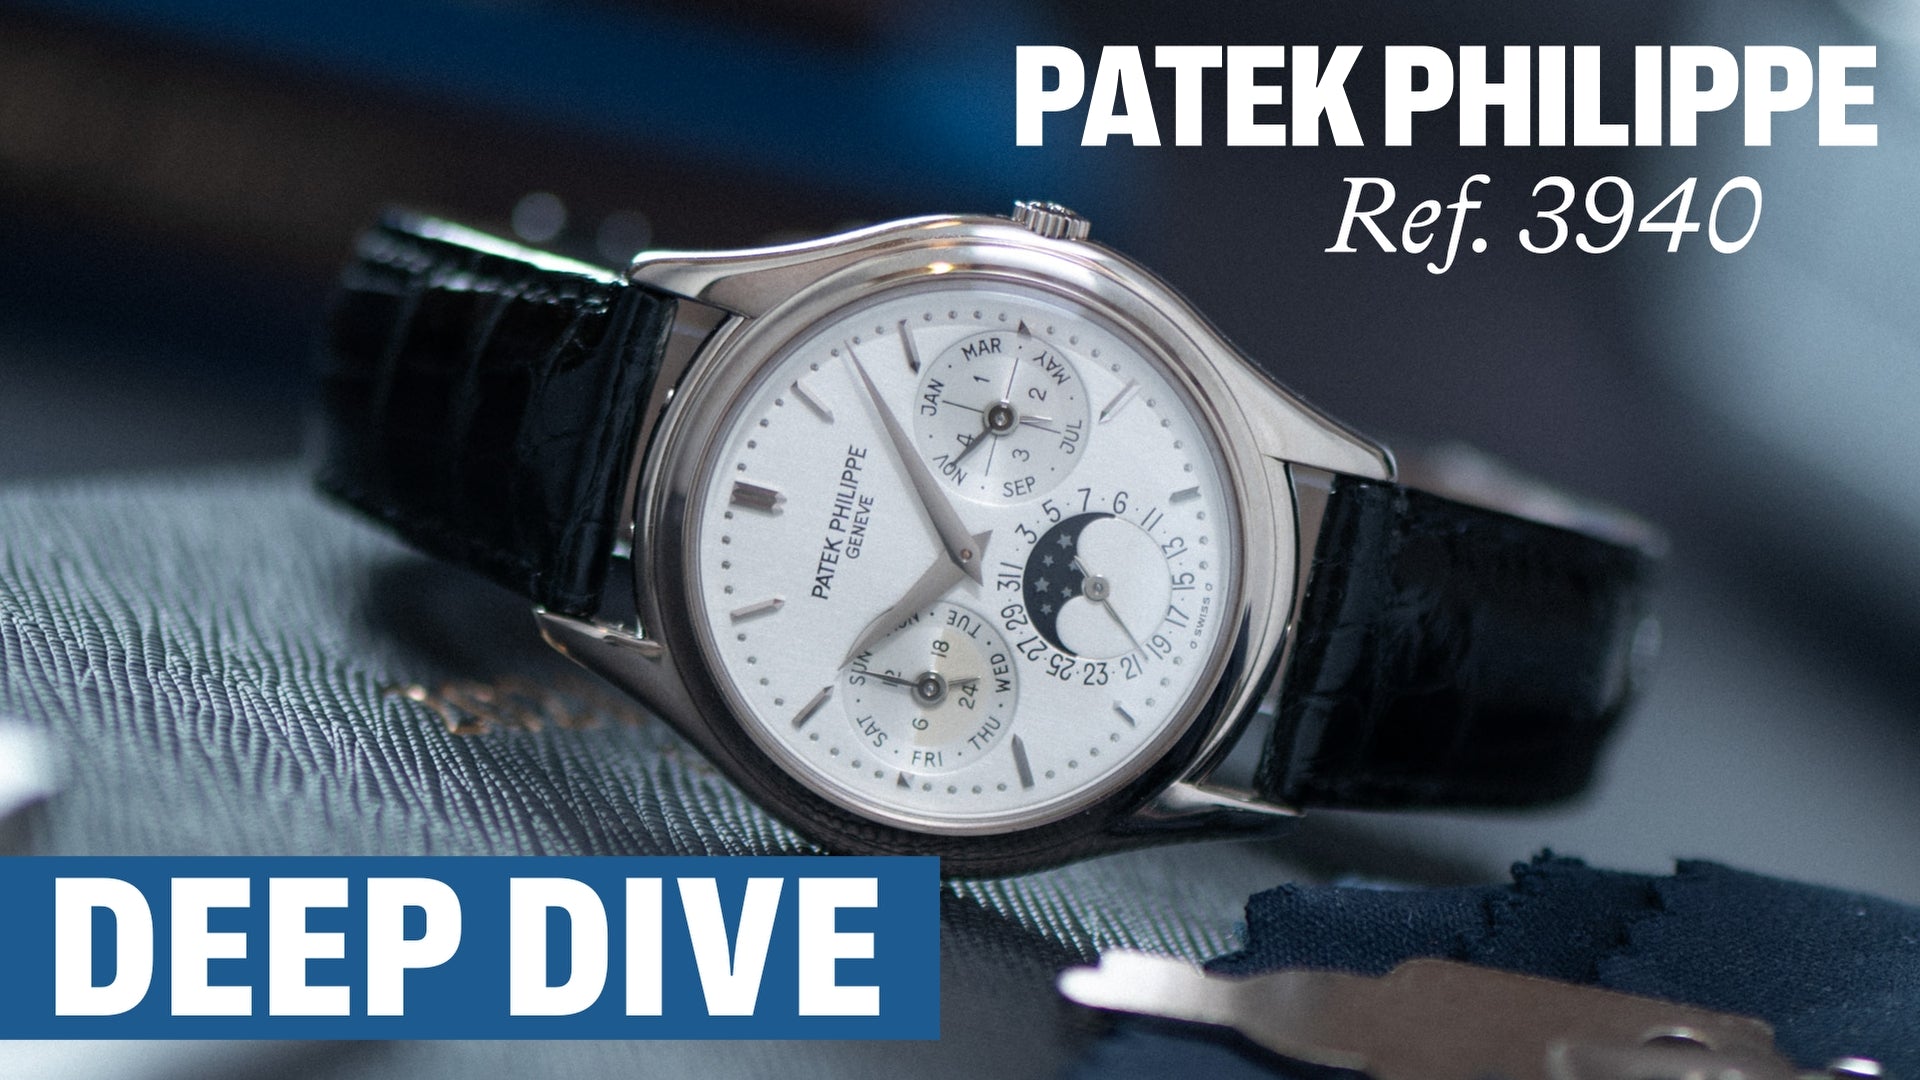 VIDEO: Patek Philippe Reference 3940 Deep Dive